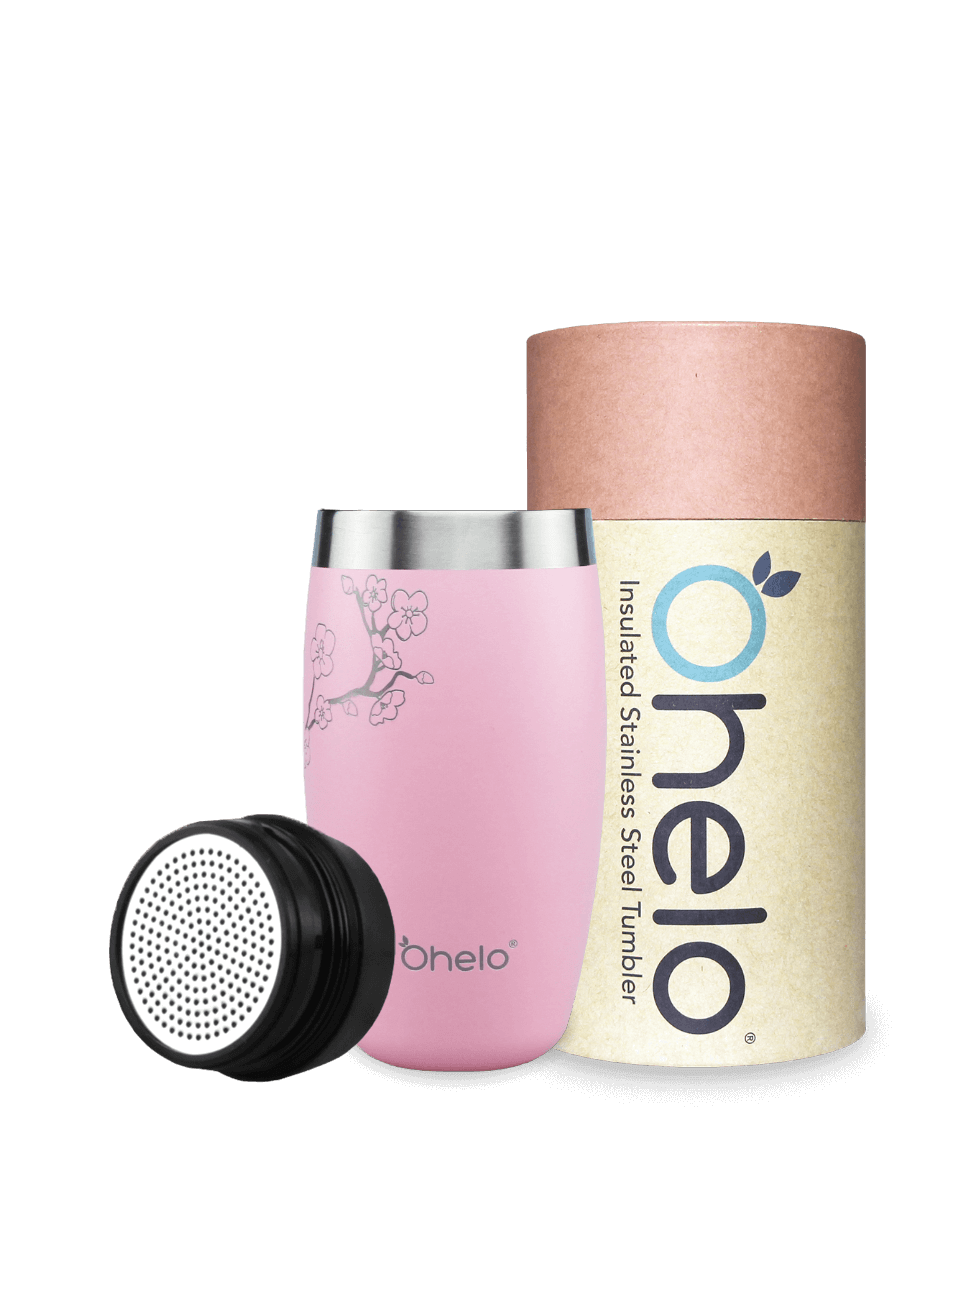 Ohelo BPA free insulated tumbler in pink with floral design, pictured with recycled packaging